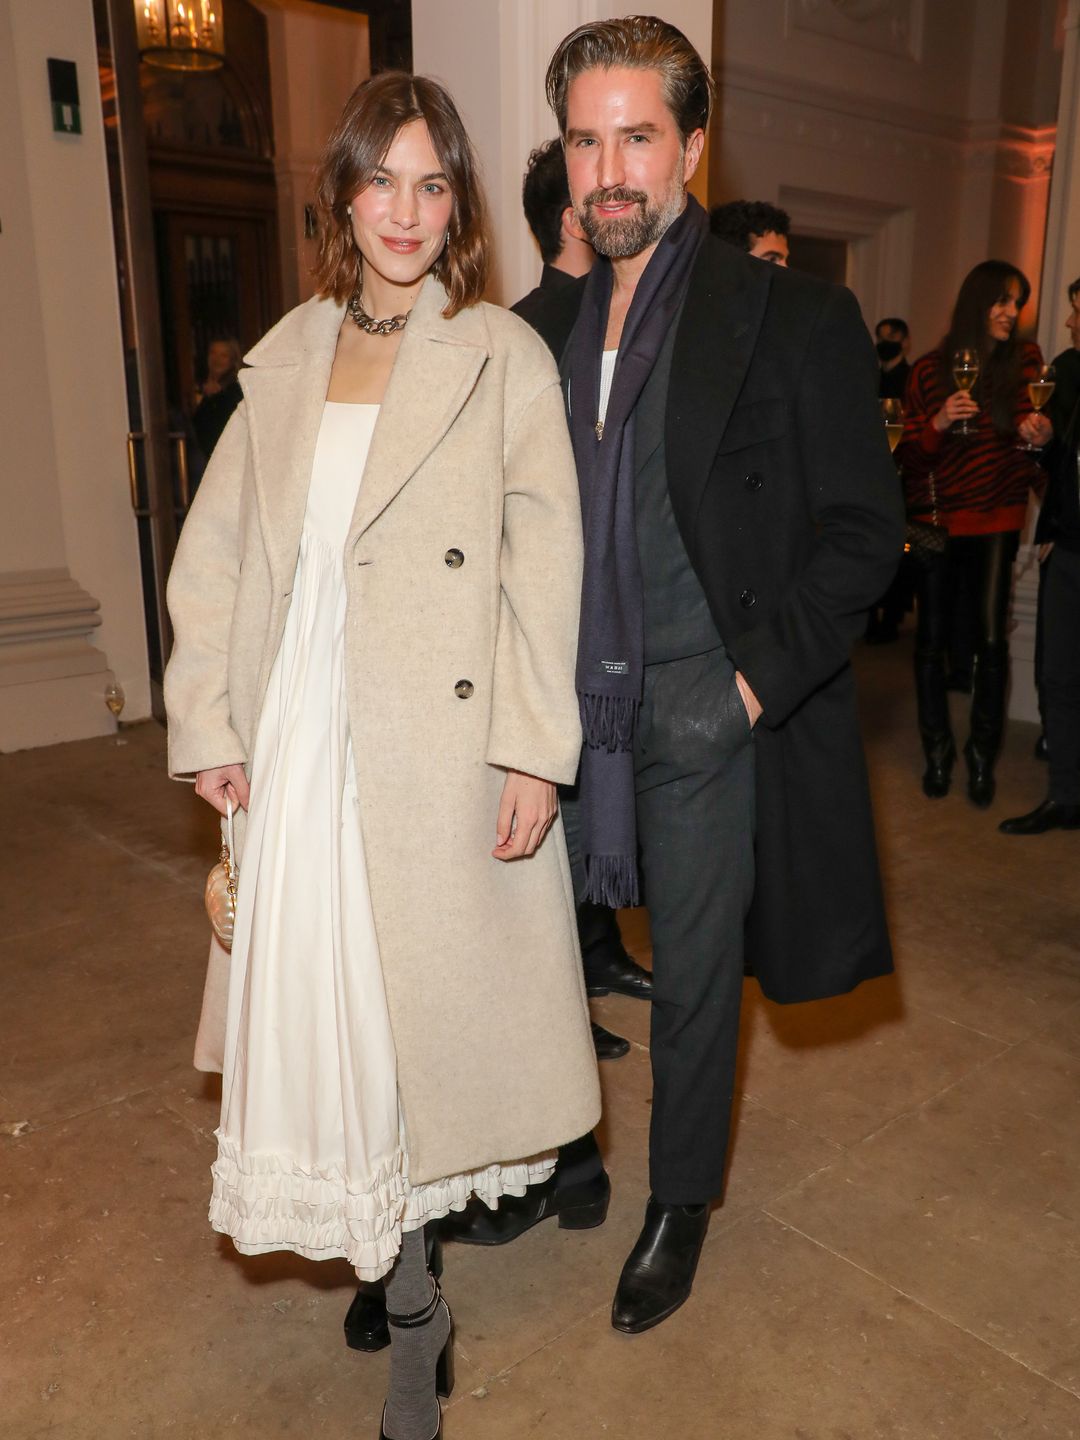 Alexa Chung and model Jack Guinness are longtime friends